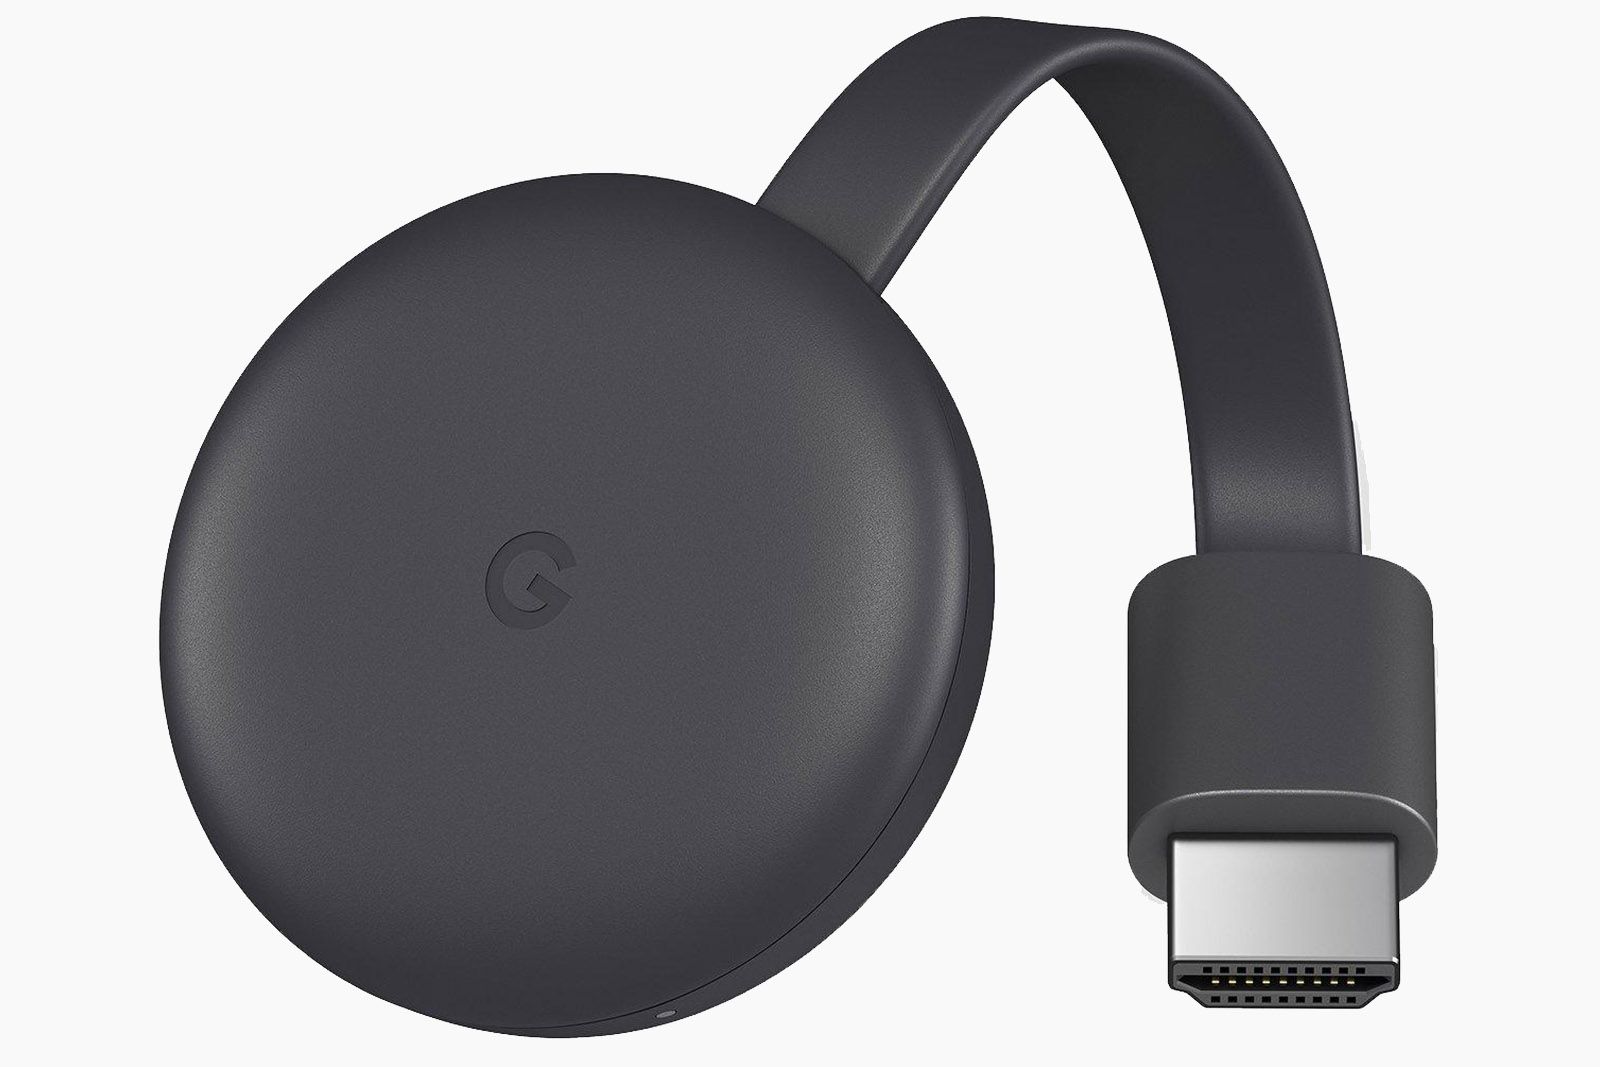 Get the new Chromecast for just £20 great Black Friday deal image 1